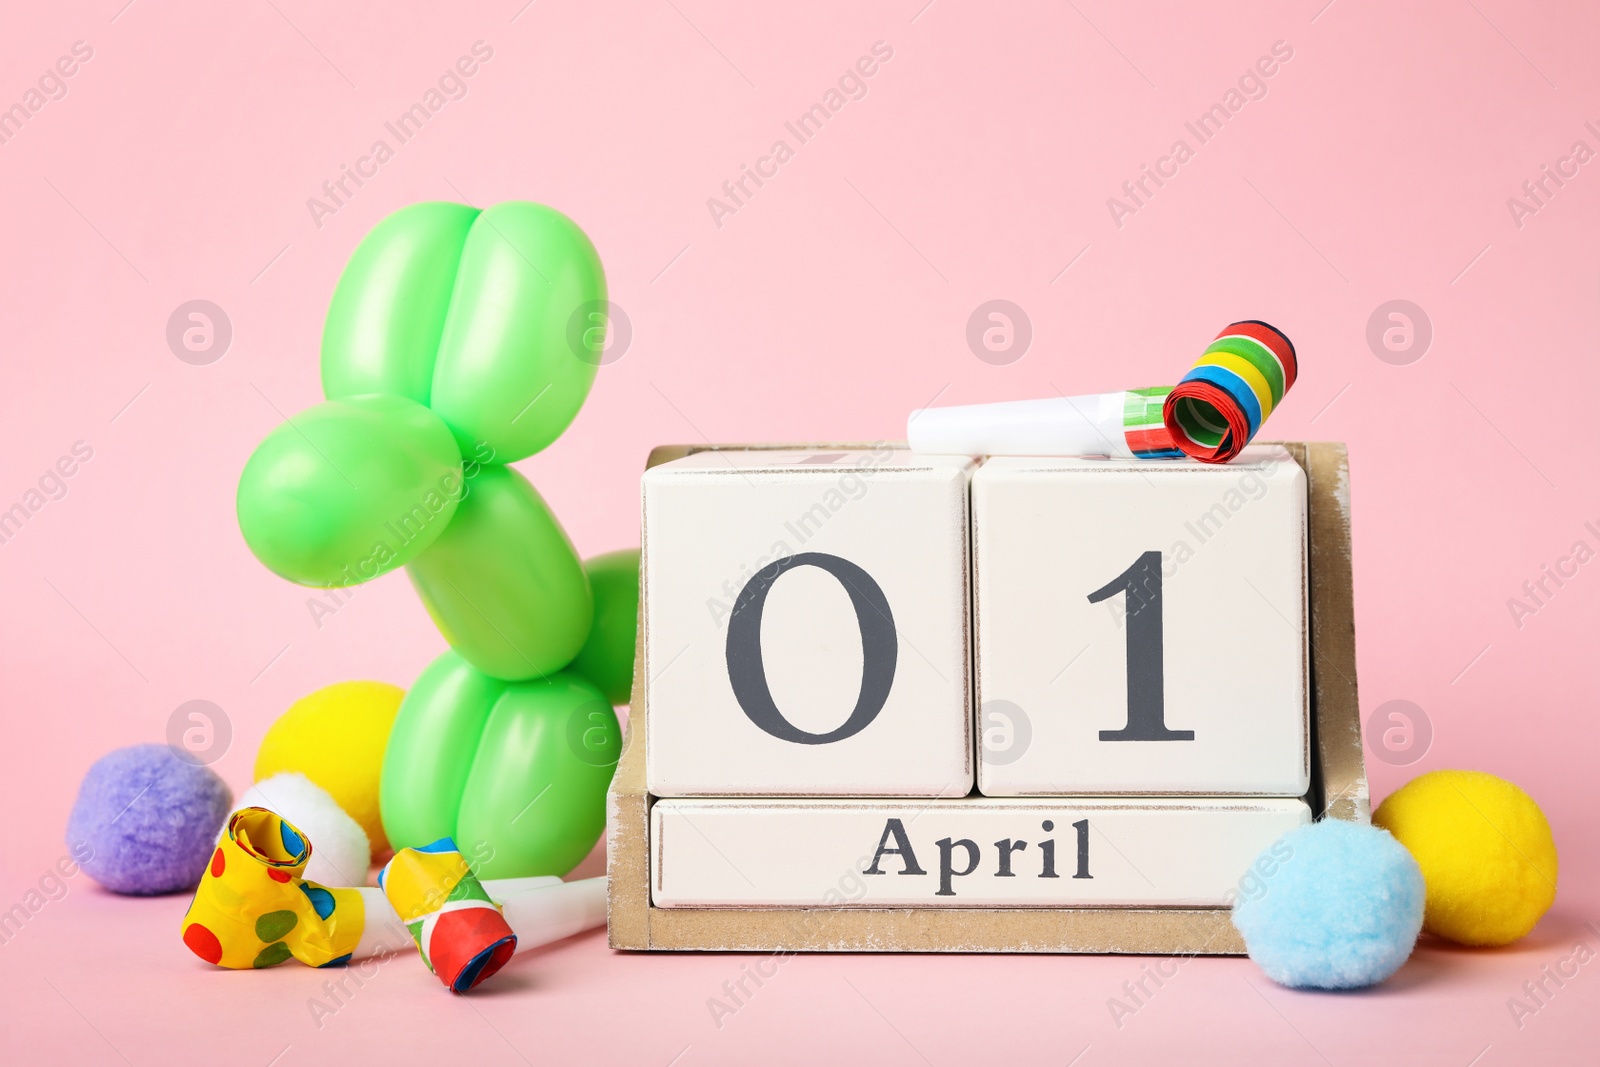 Photo of Wooden block calendar and party decor on pink background. April fool's day